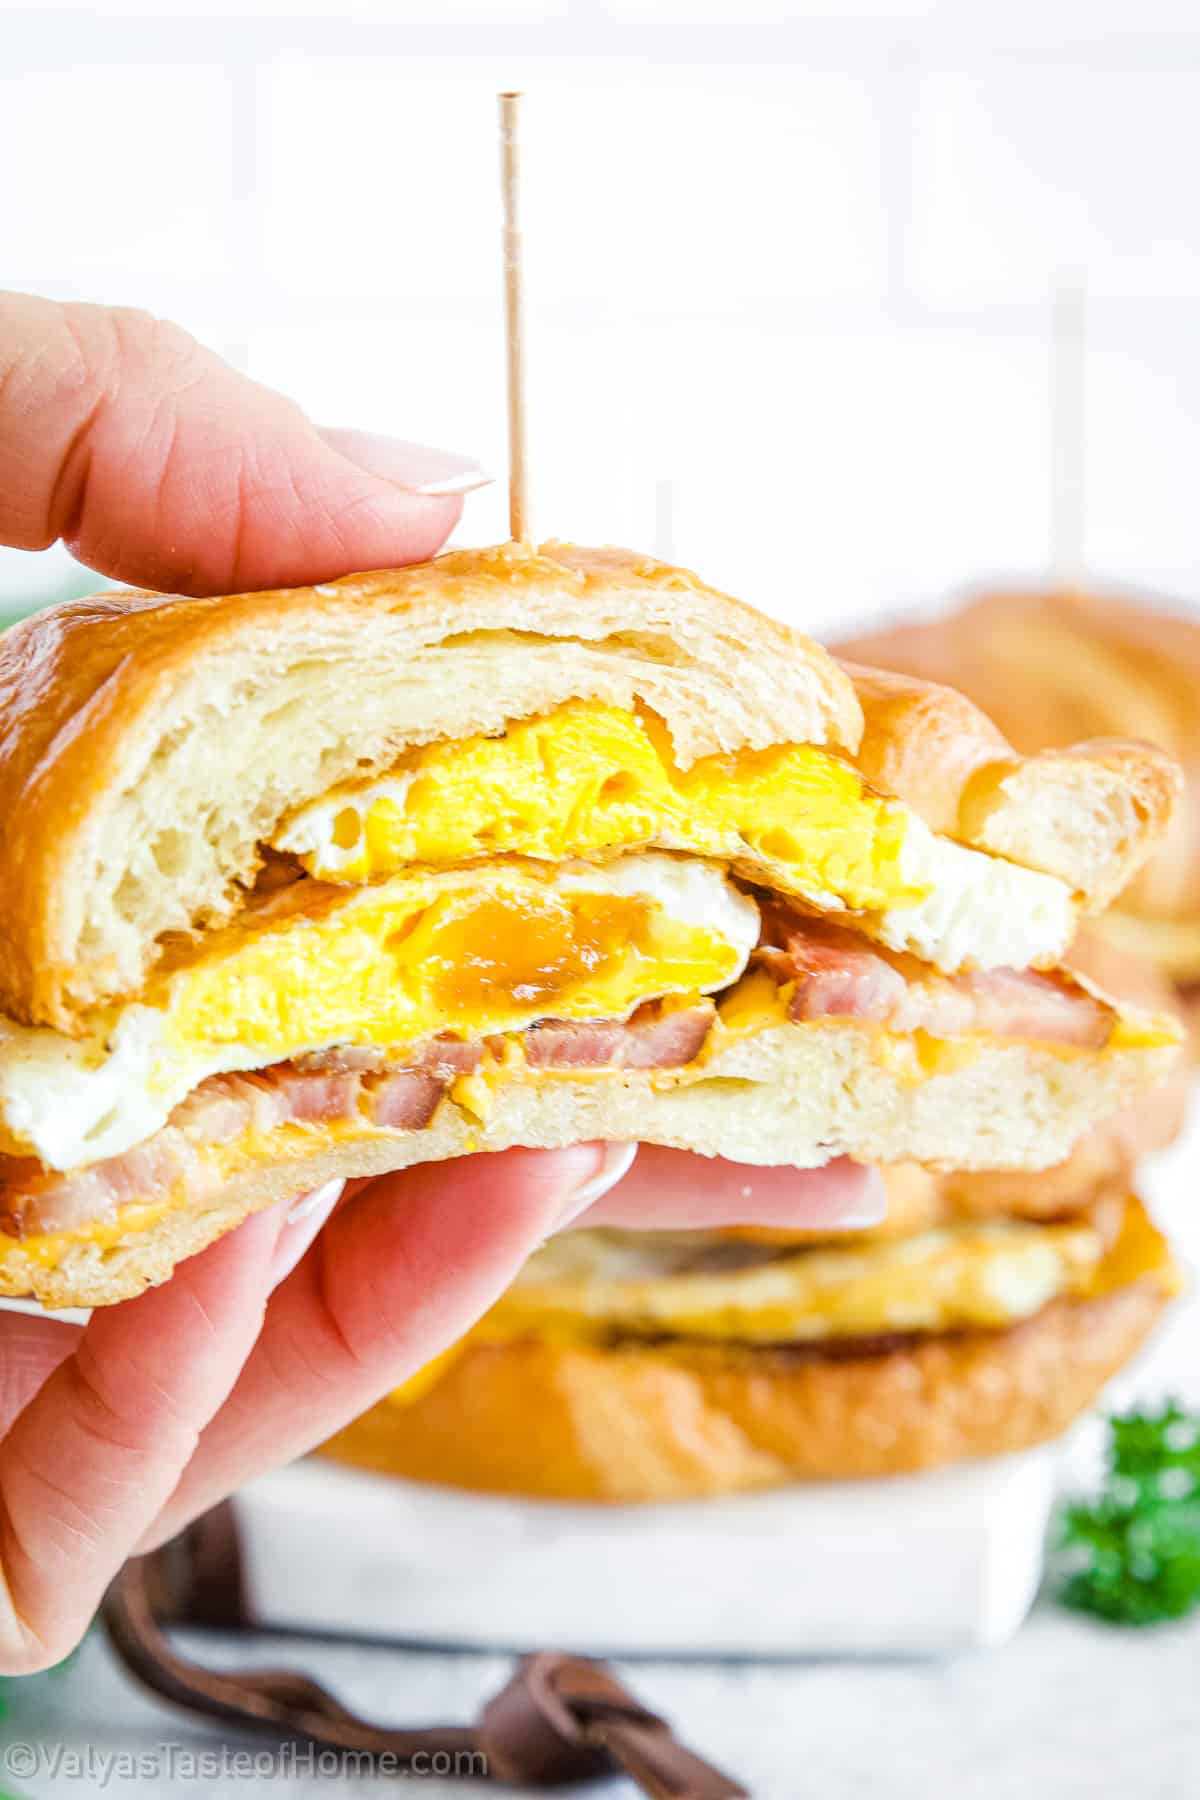 By layering crispy bacon, perfectly cooked eggs, and melted cheese on a warm croissant, you create a combination of flavors and textures that will have you coming back for more.